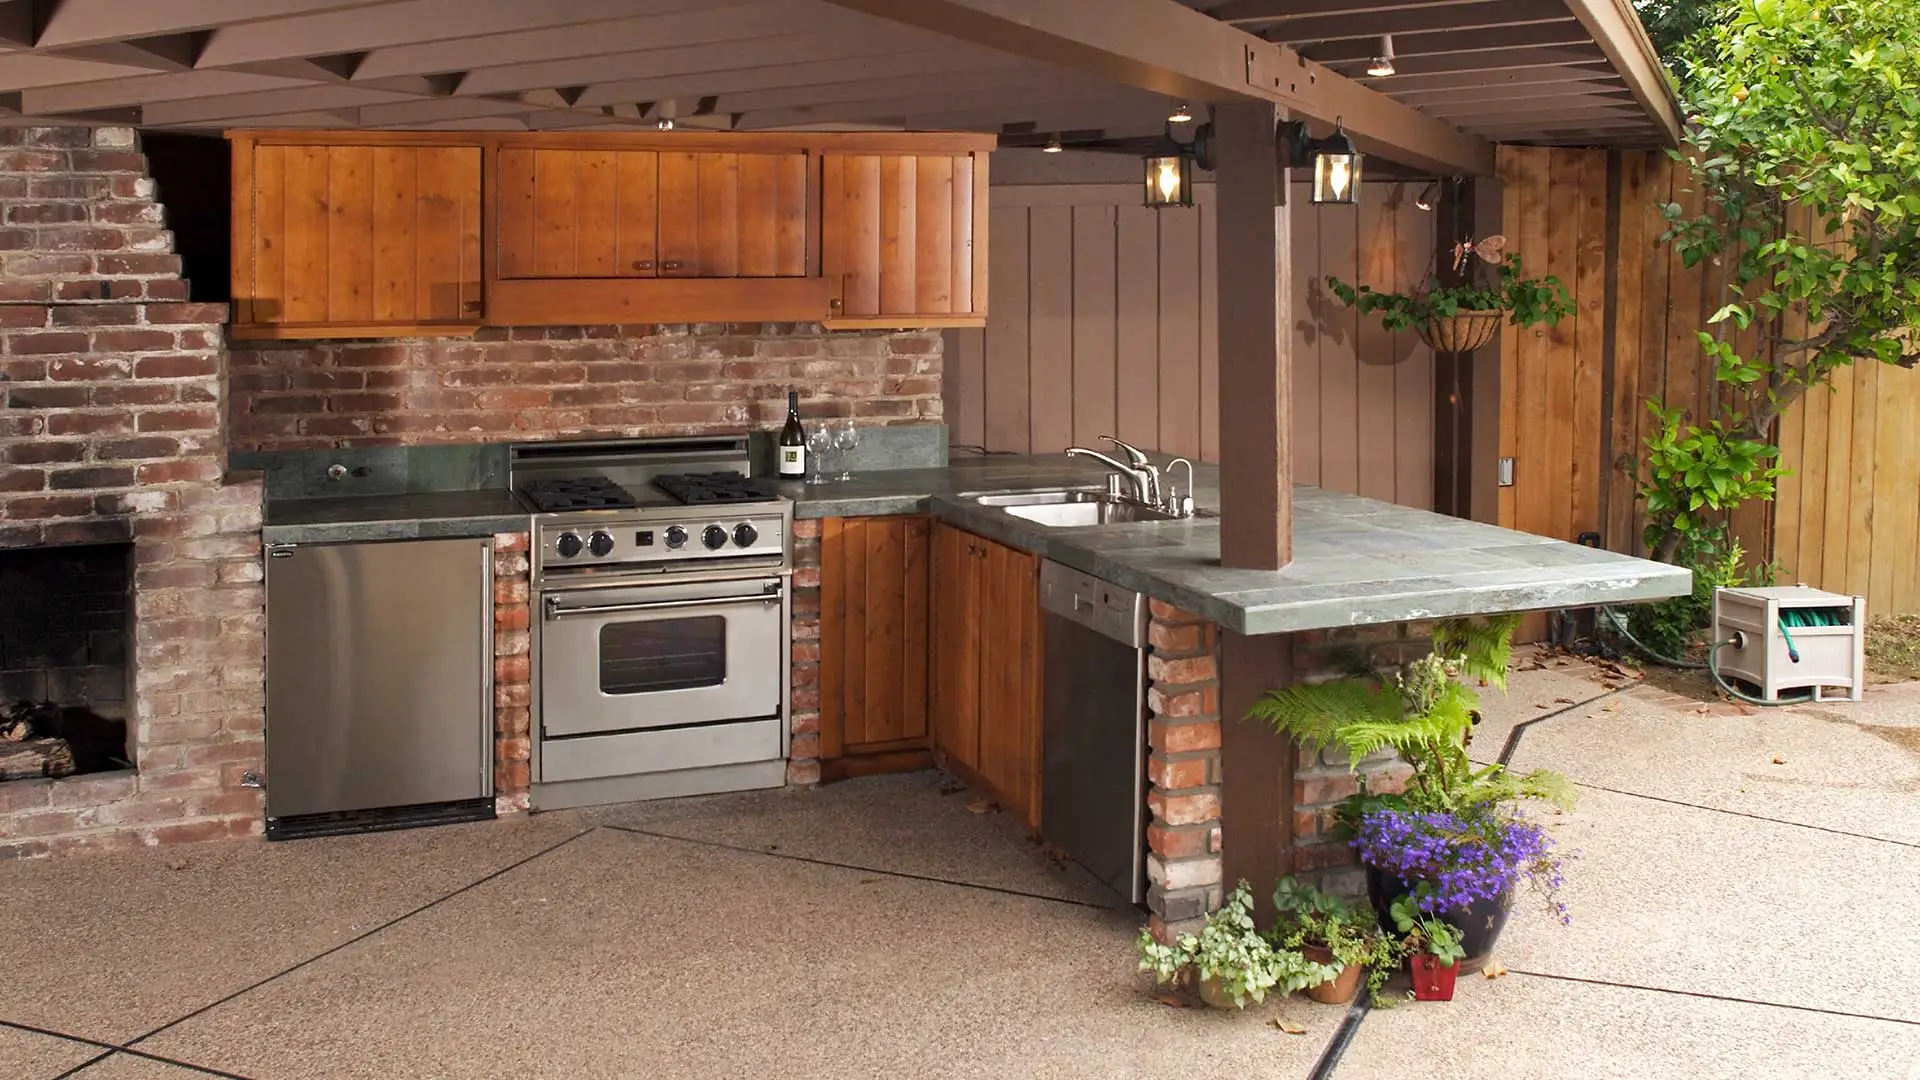 Professionally and expertly installed outdoor kitchen.